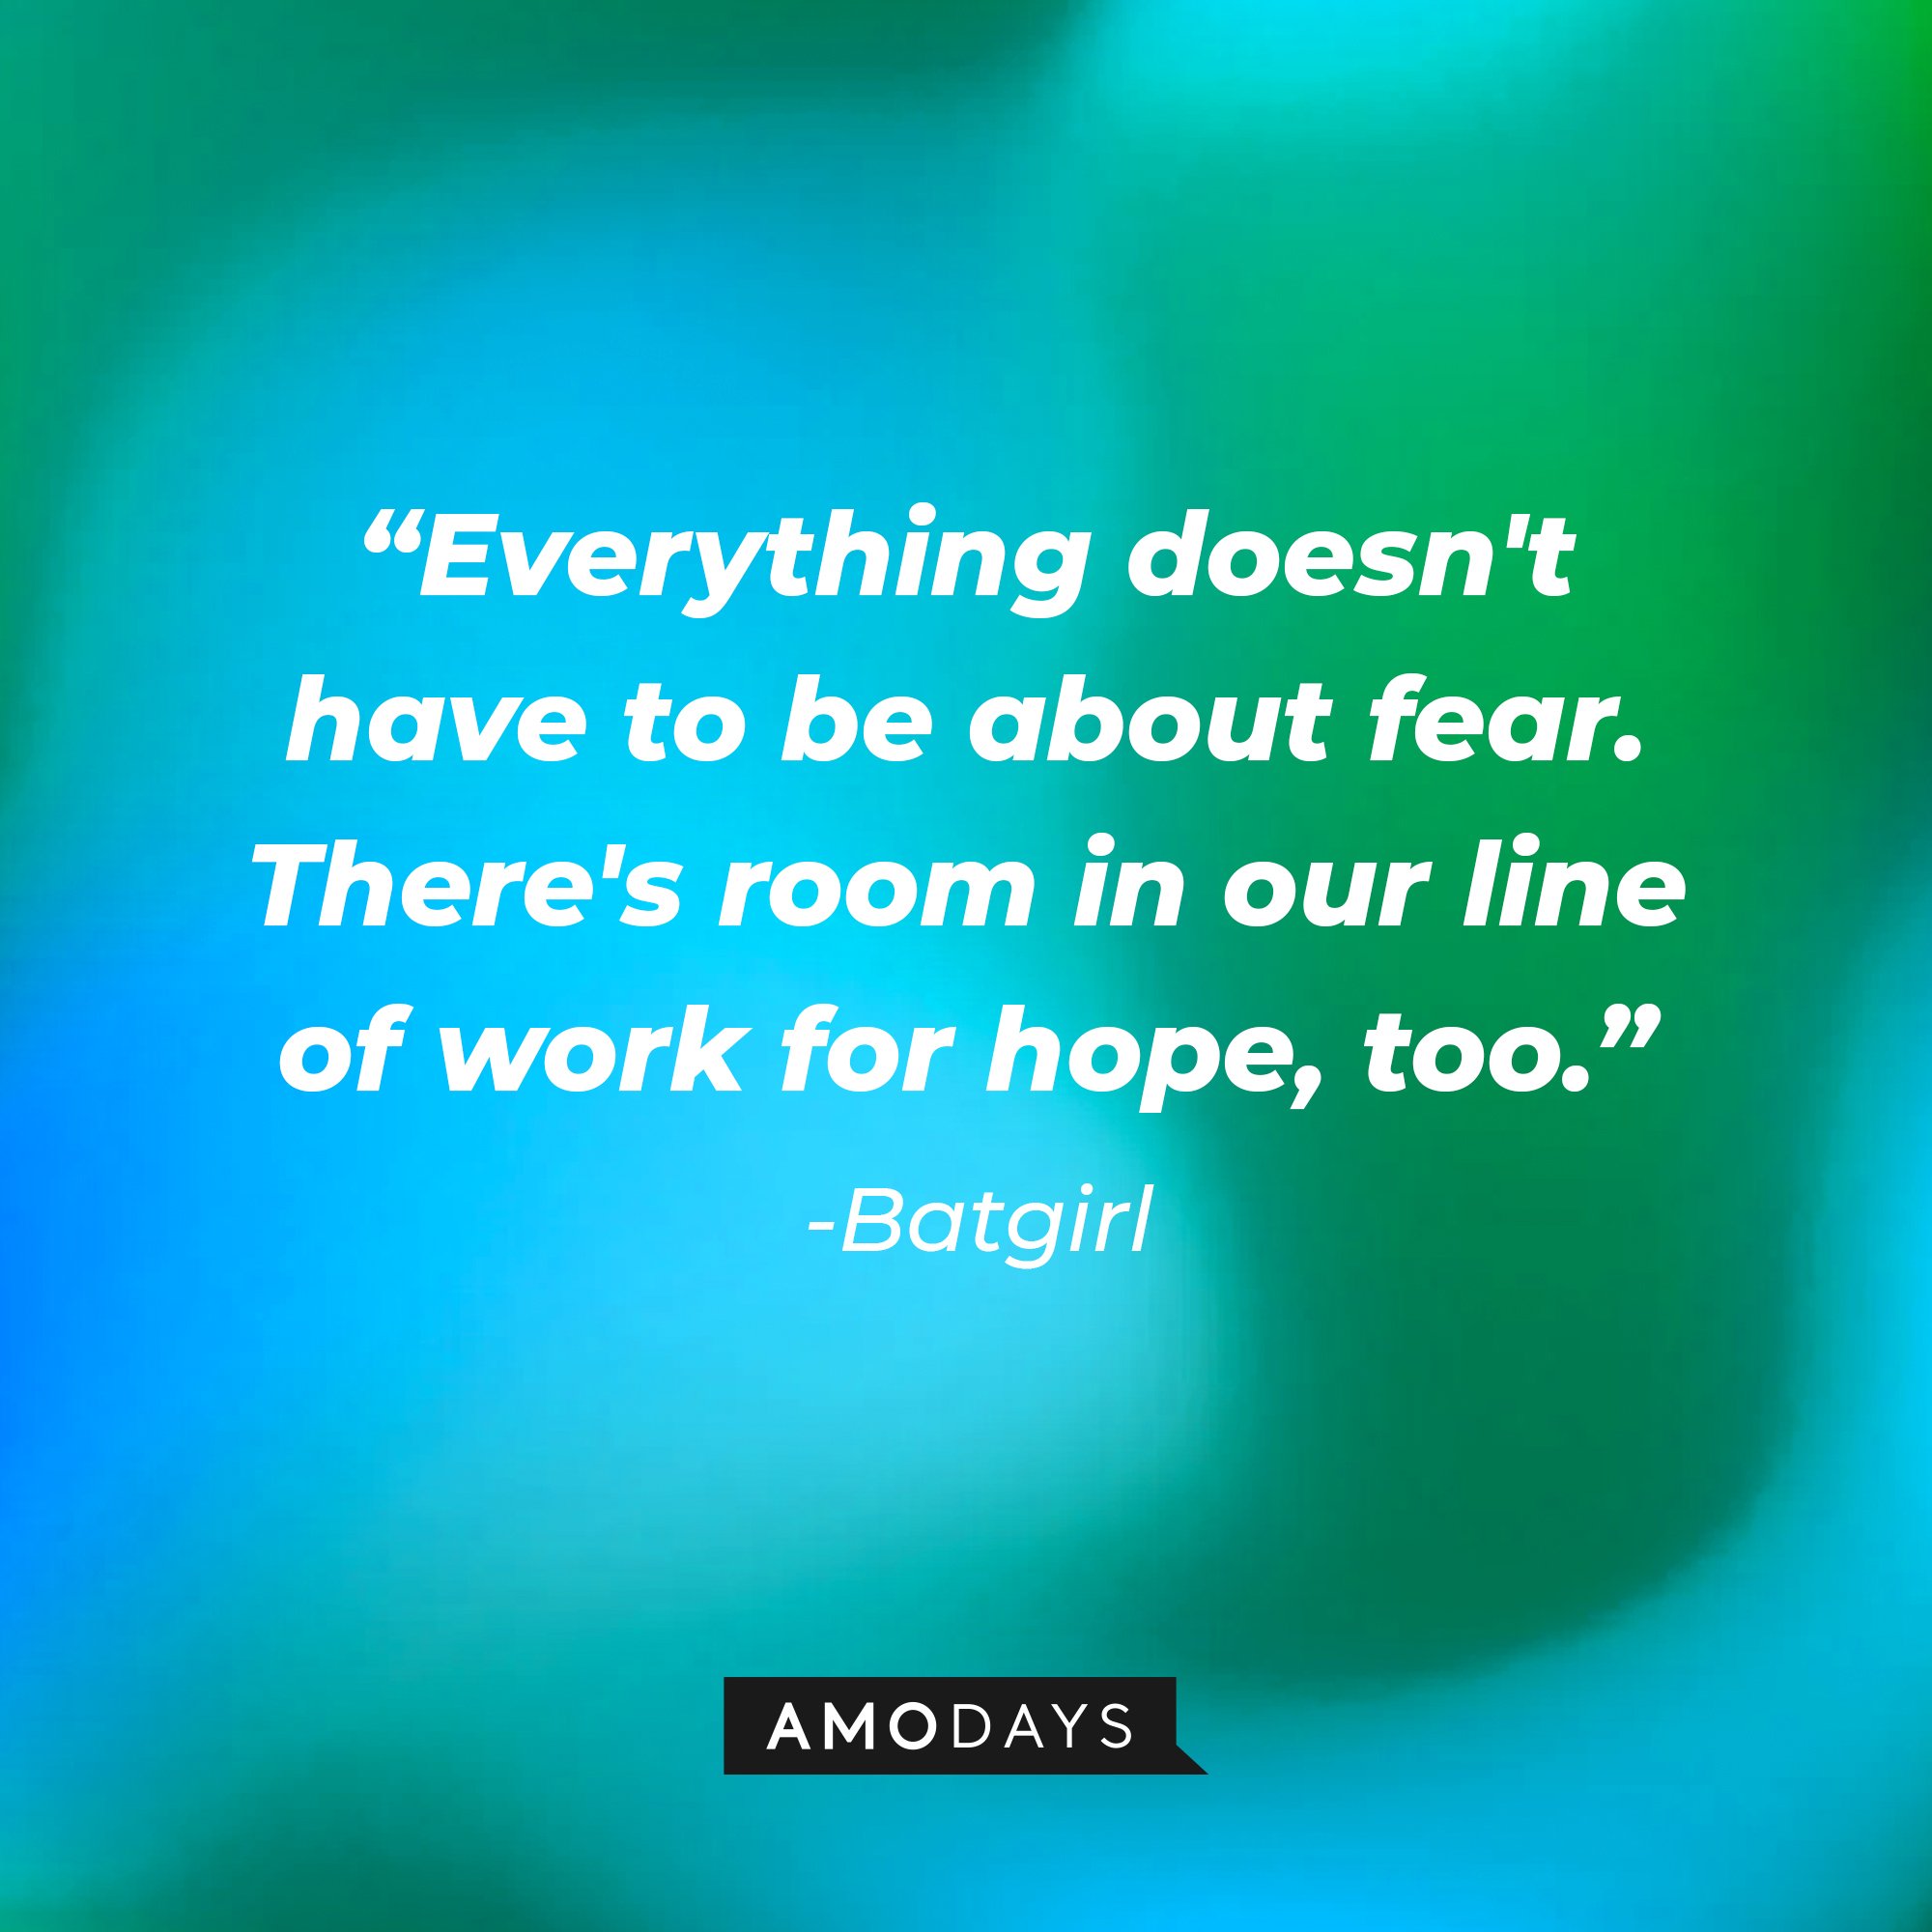 Batgirl's quote: "Everything doesn't have to be about fear. There's room in our line of work for hope, too." | Image: AmoDays